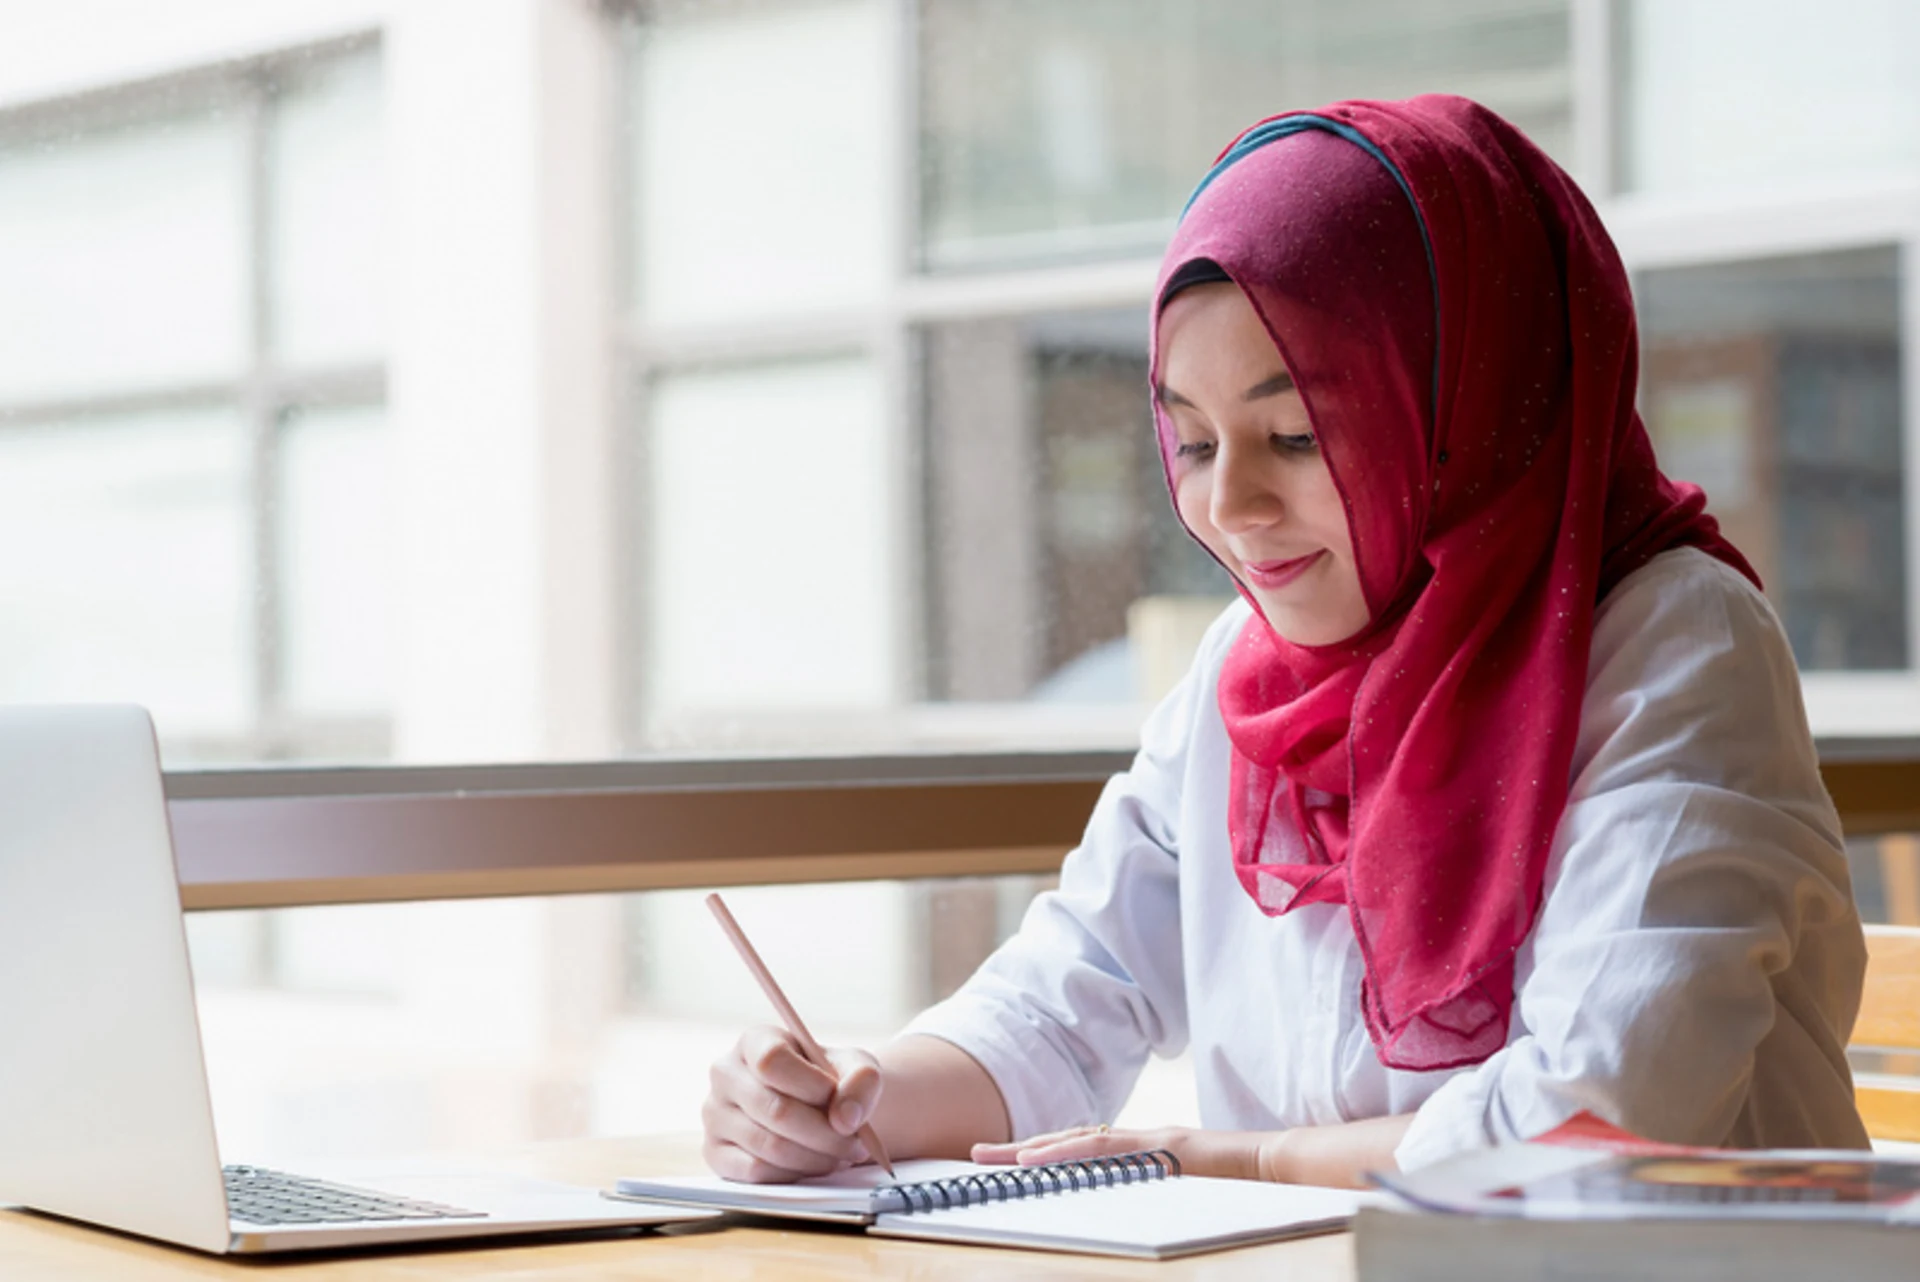 Learn the Quran Online with a Professional Female Tutor